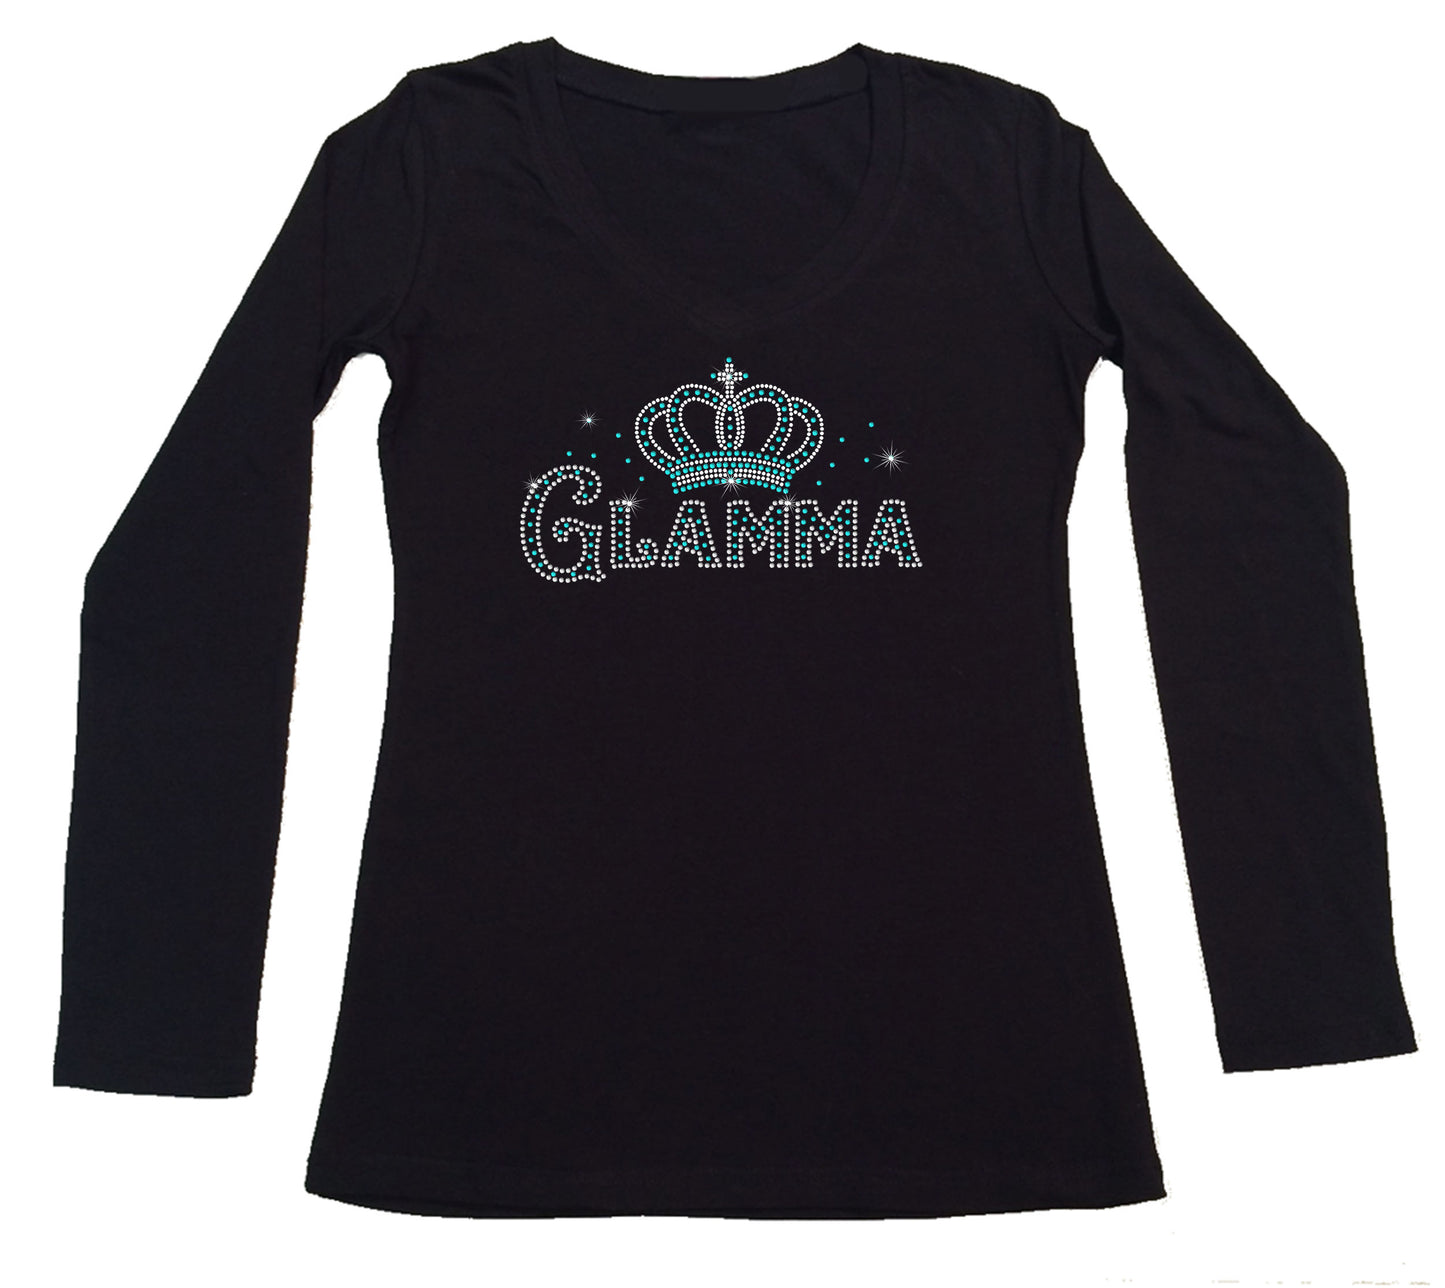 Womens T-shirt with Glamma with Crown in Rhinestones